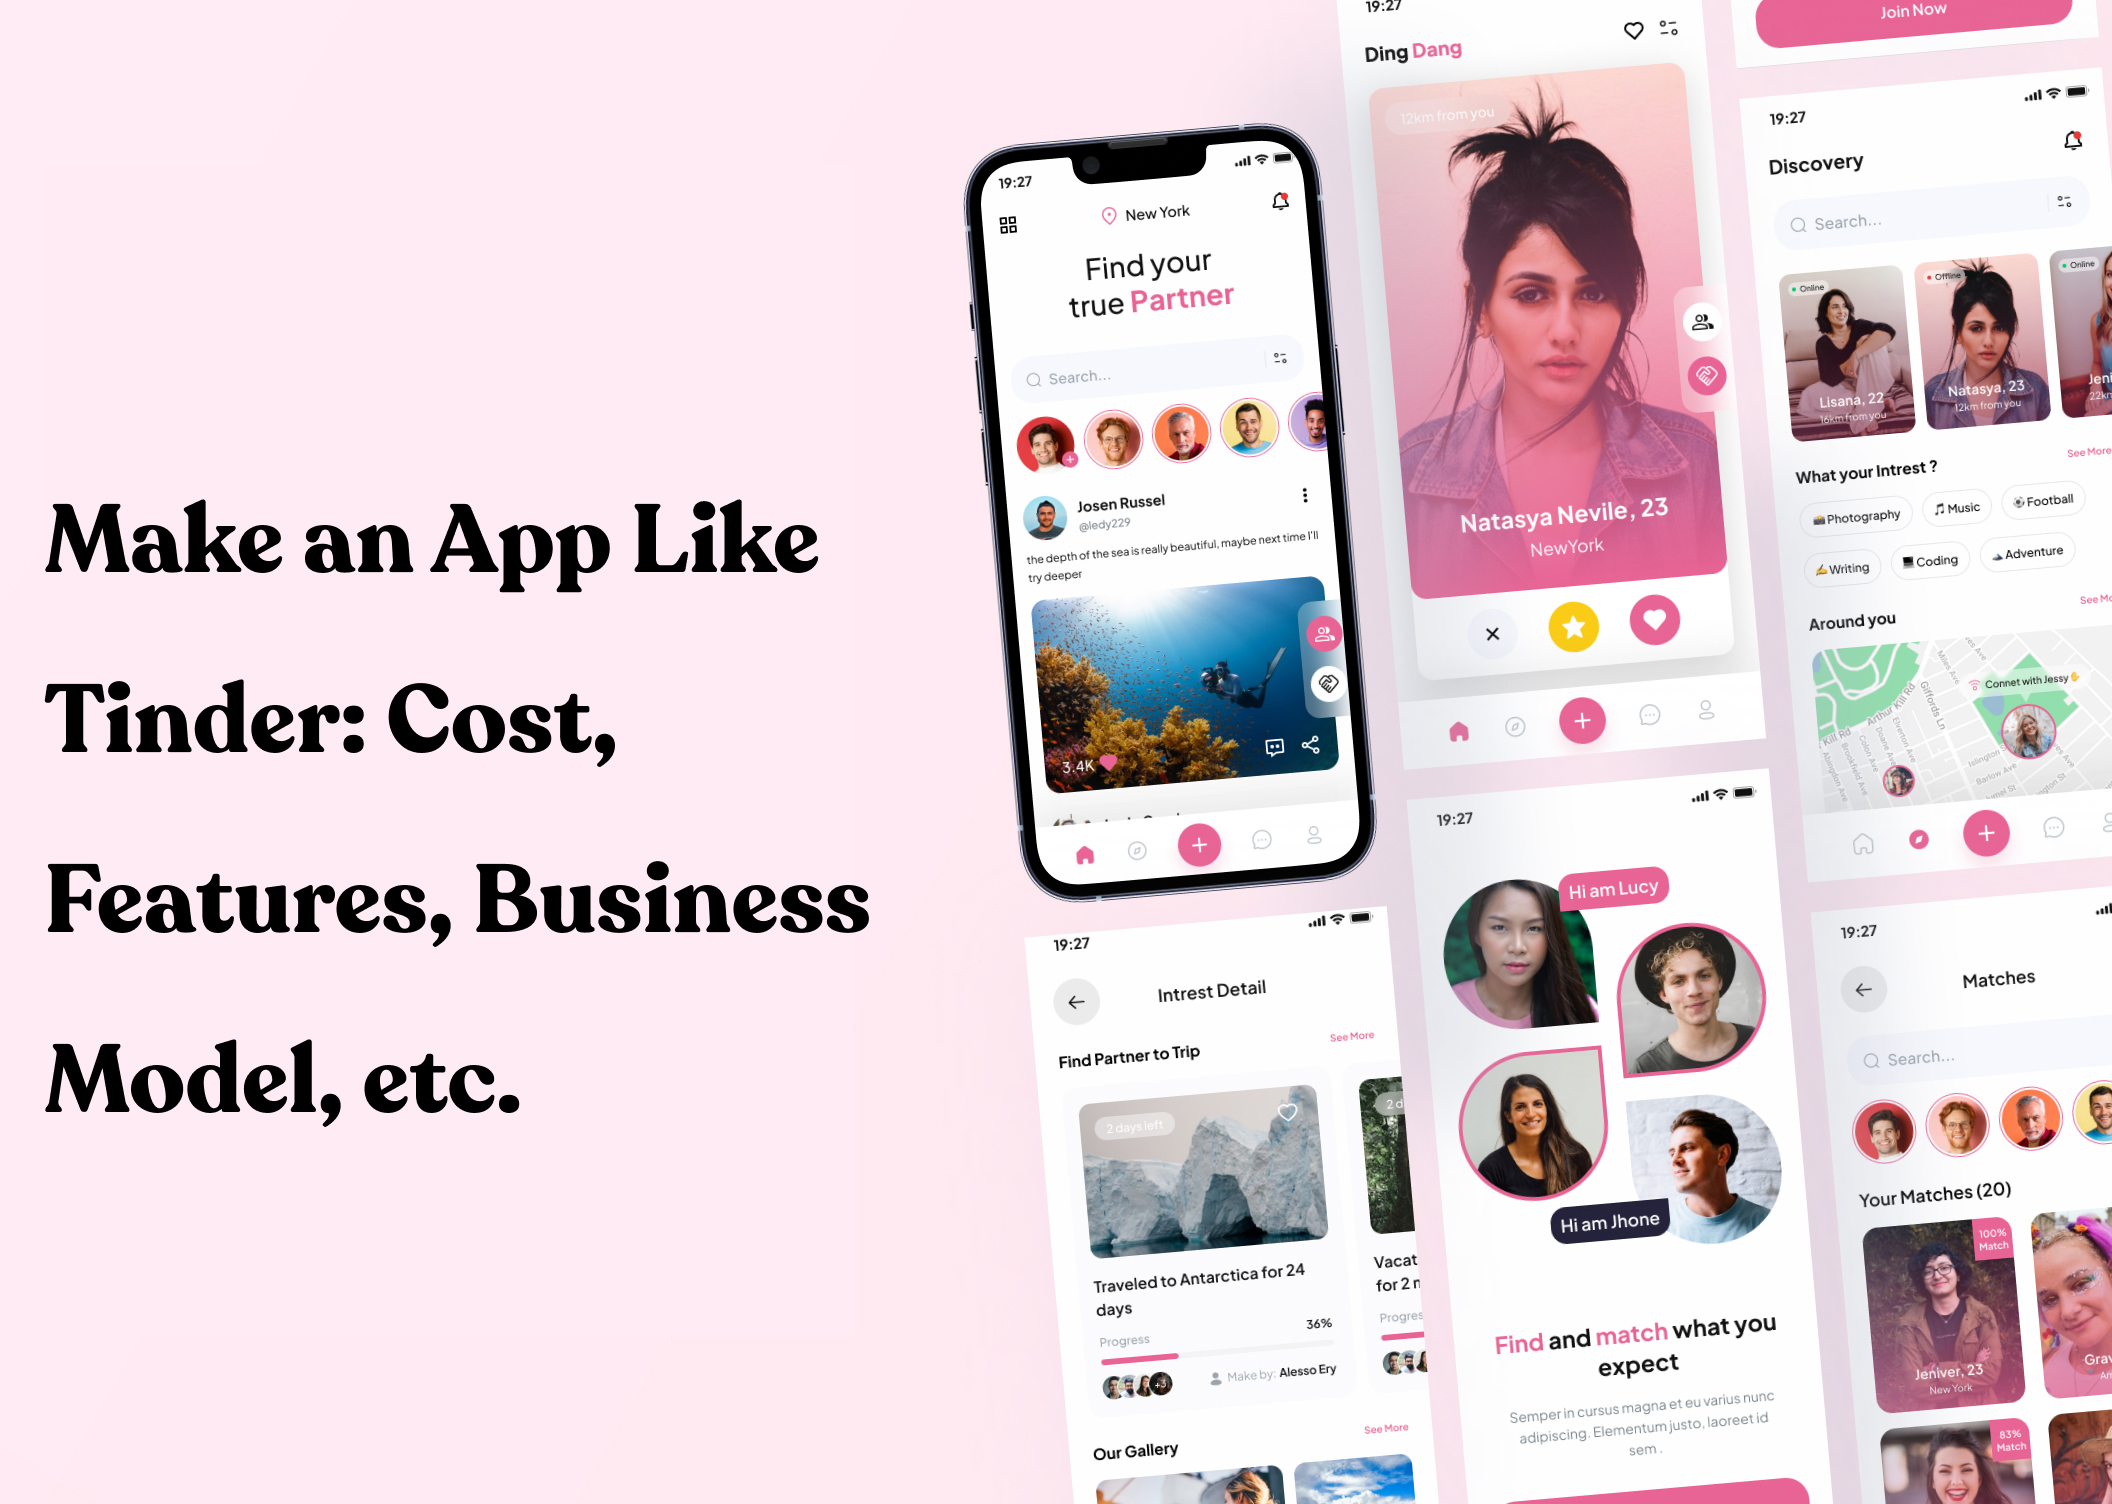 Make an App Like Tinder: Cost, Features, Business Model, etc.